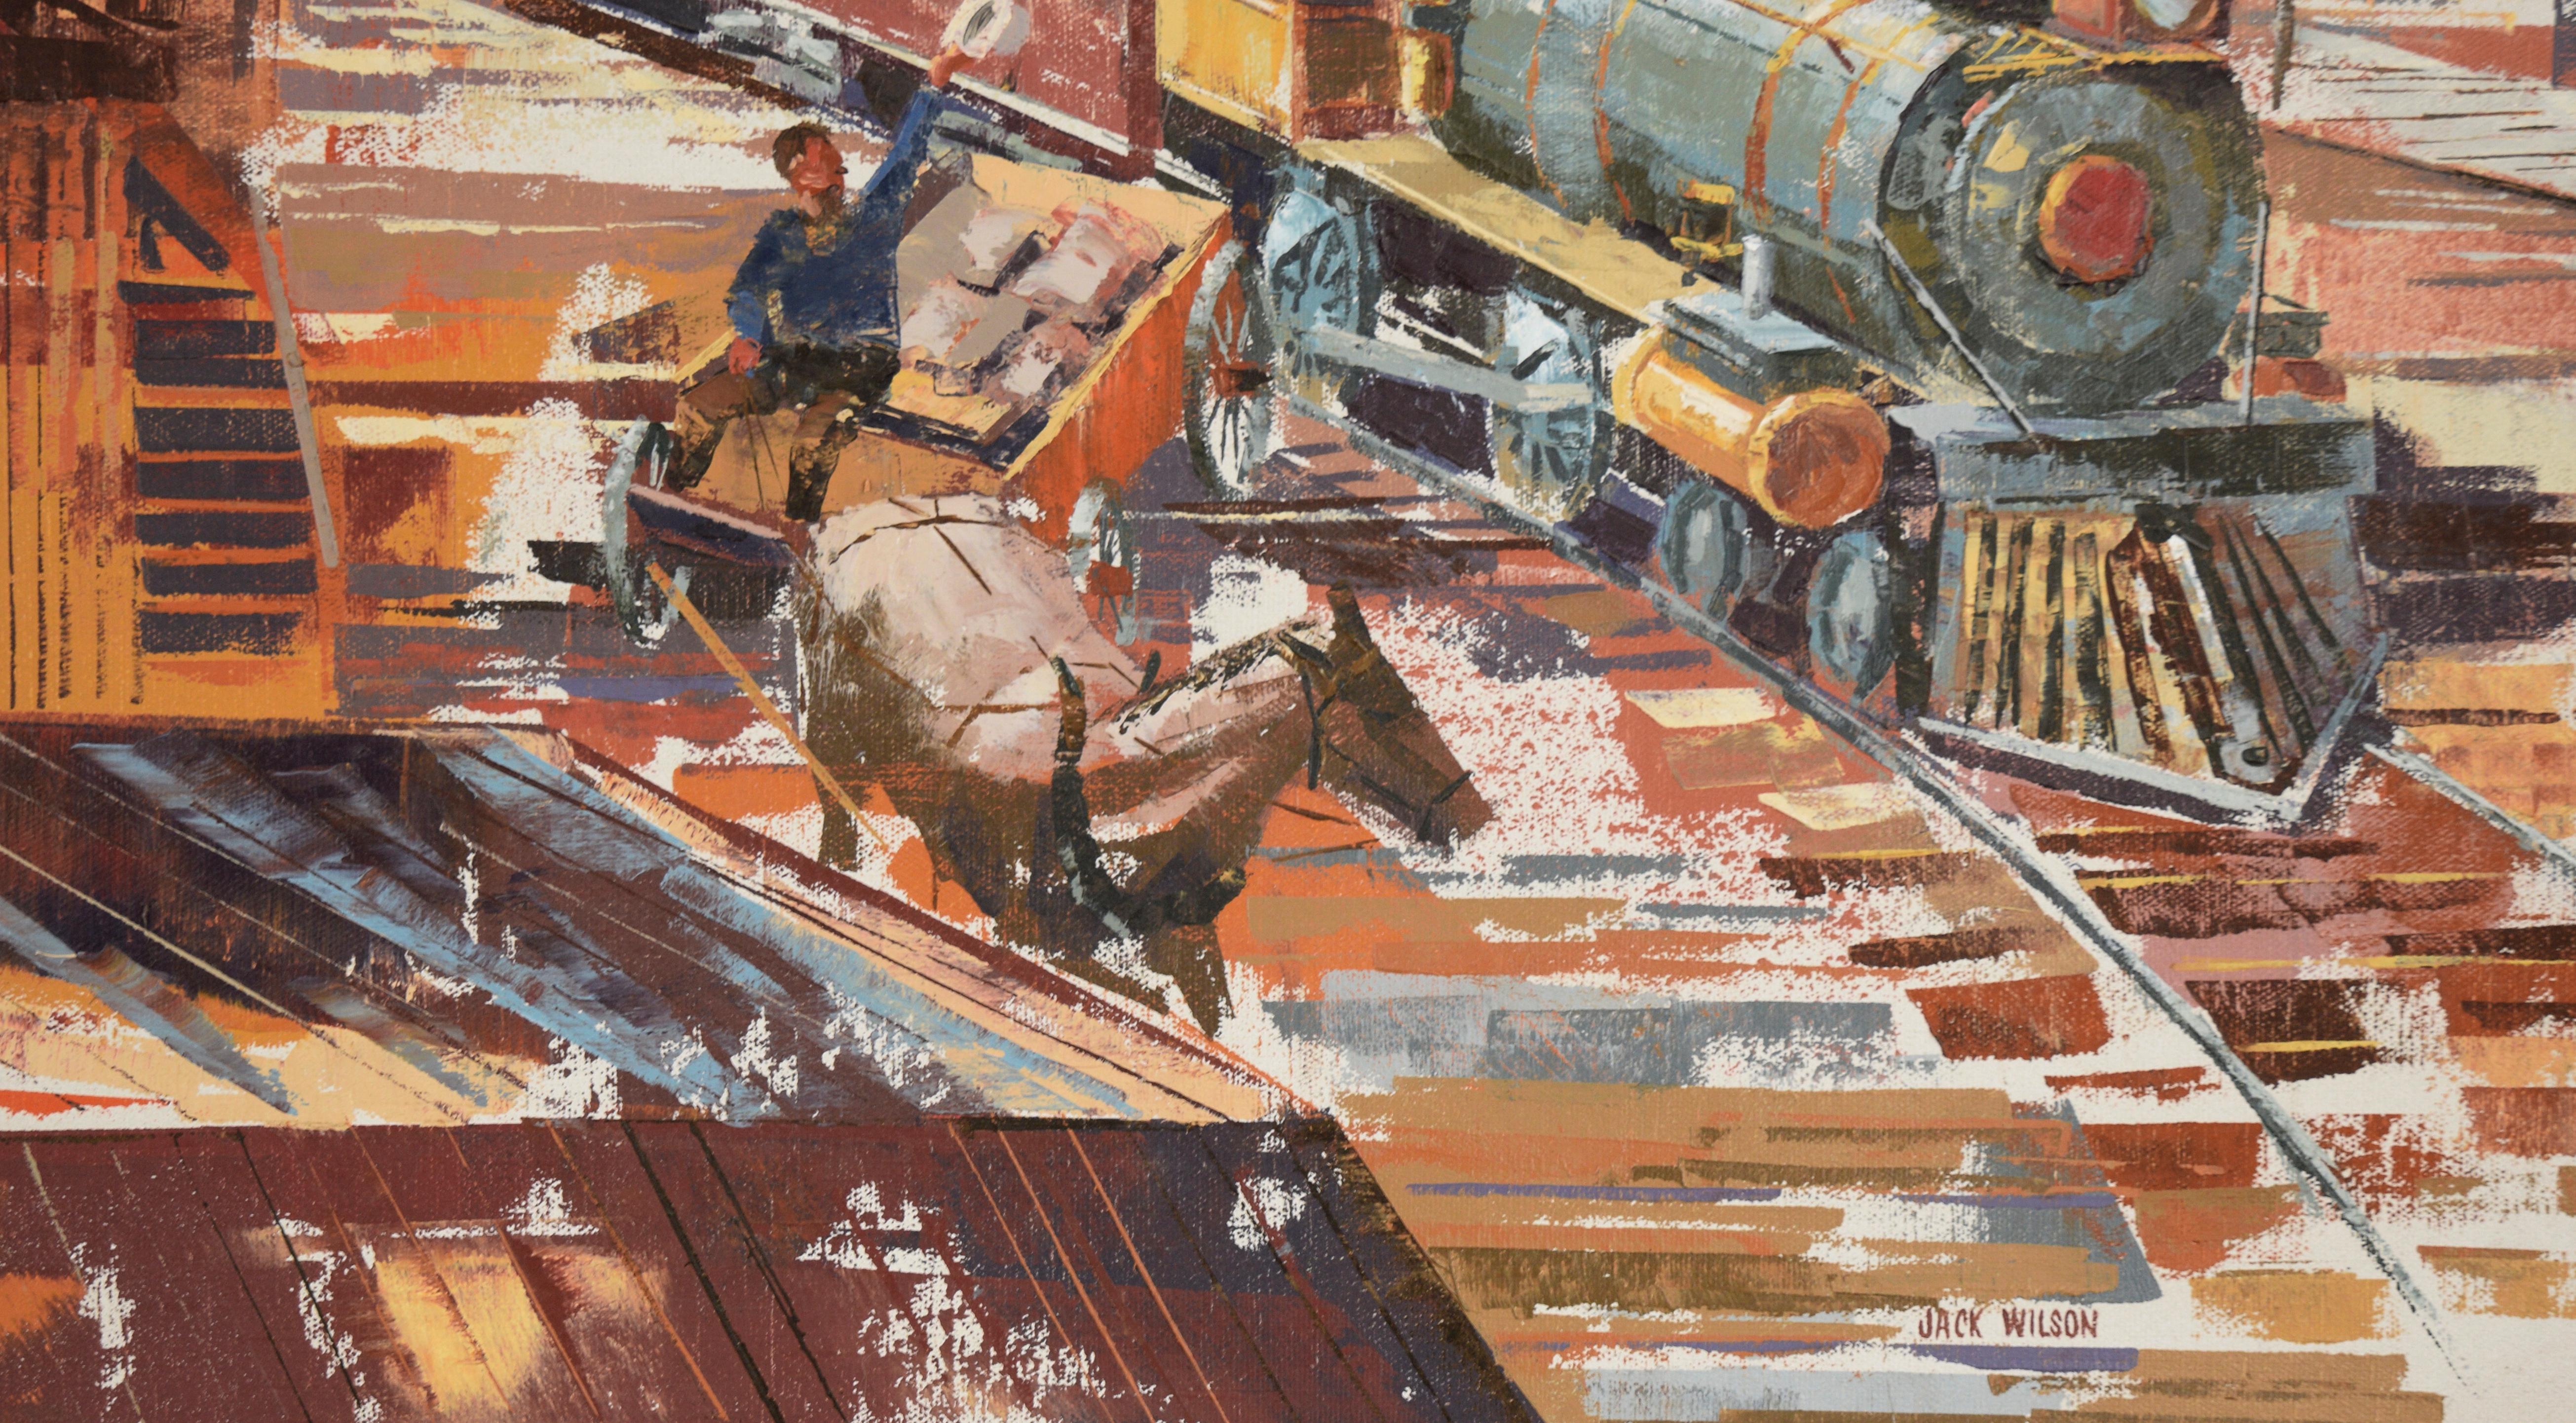 At the Train Station - Industrial Landscape - Brown Figurative Painting by Jack Wilson